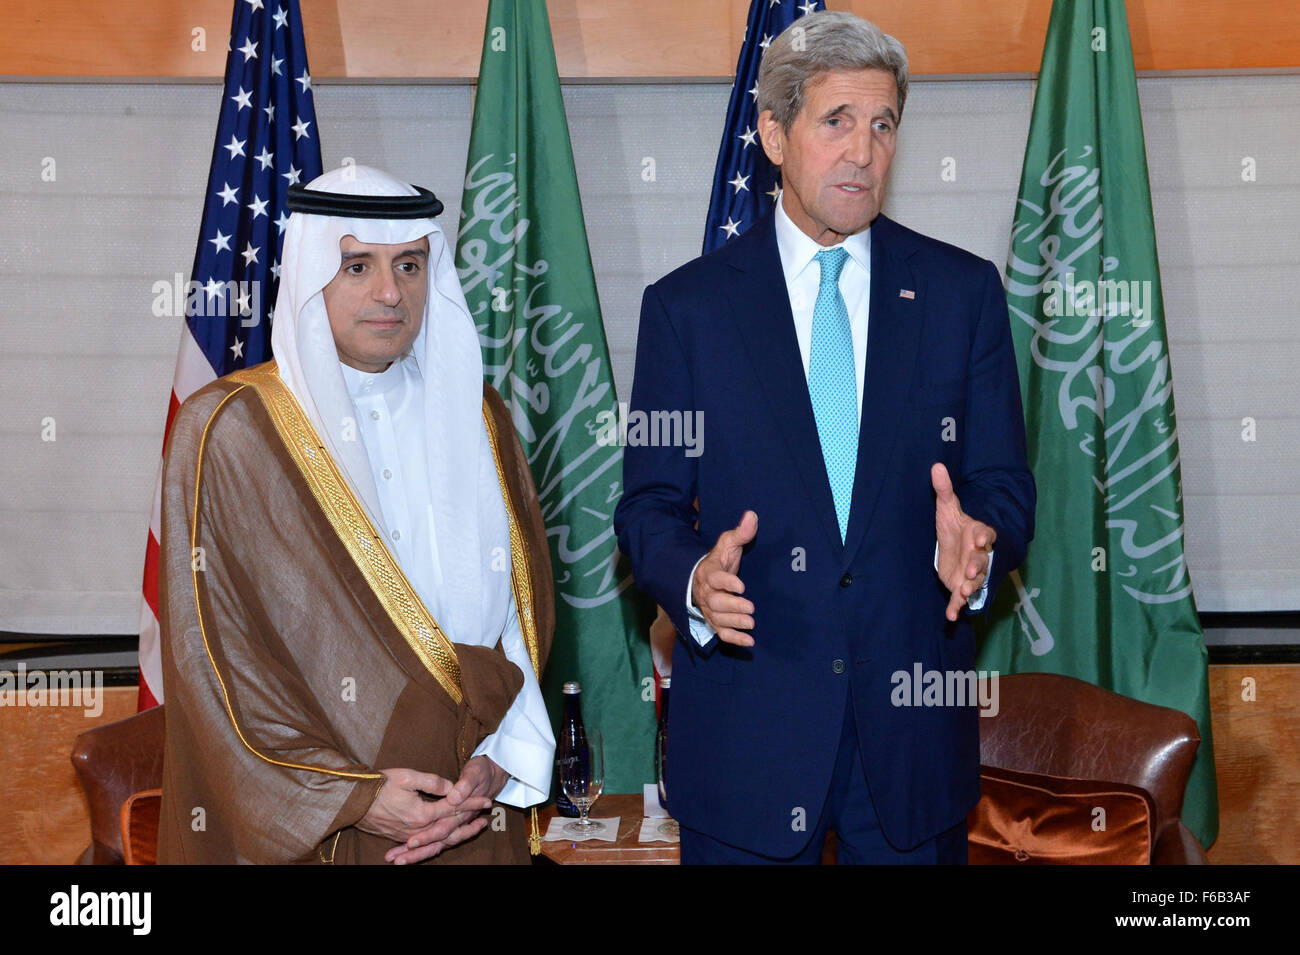 Secretary Kerry and Saudi Foreign Minister al-Jubeir Speak to Reporters Before Their Bilateral Meeting in New York City Stock Photo